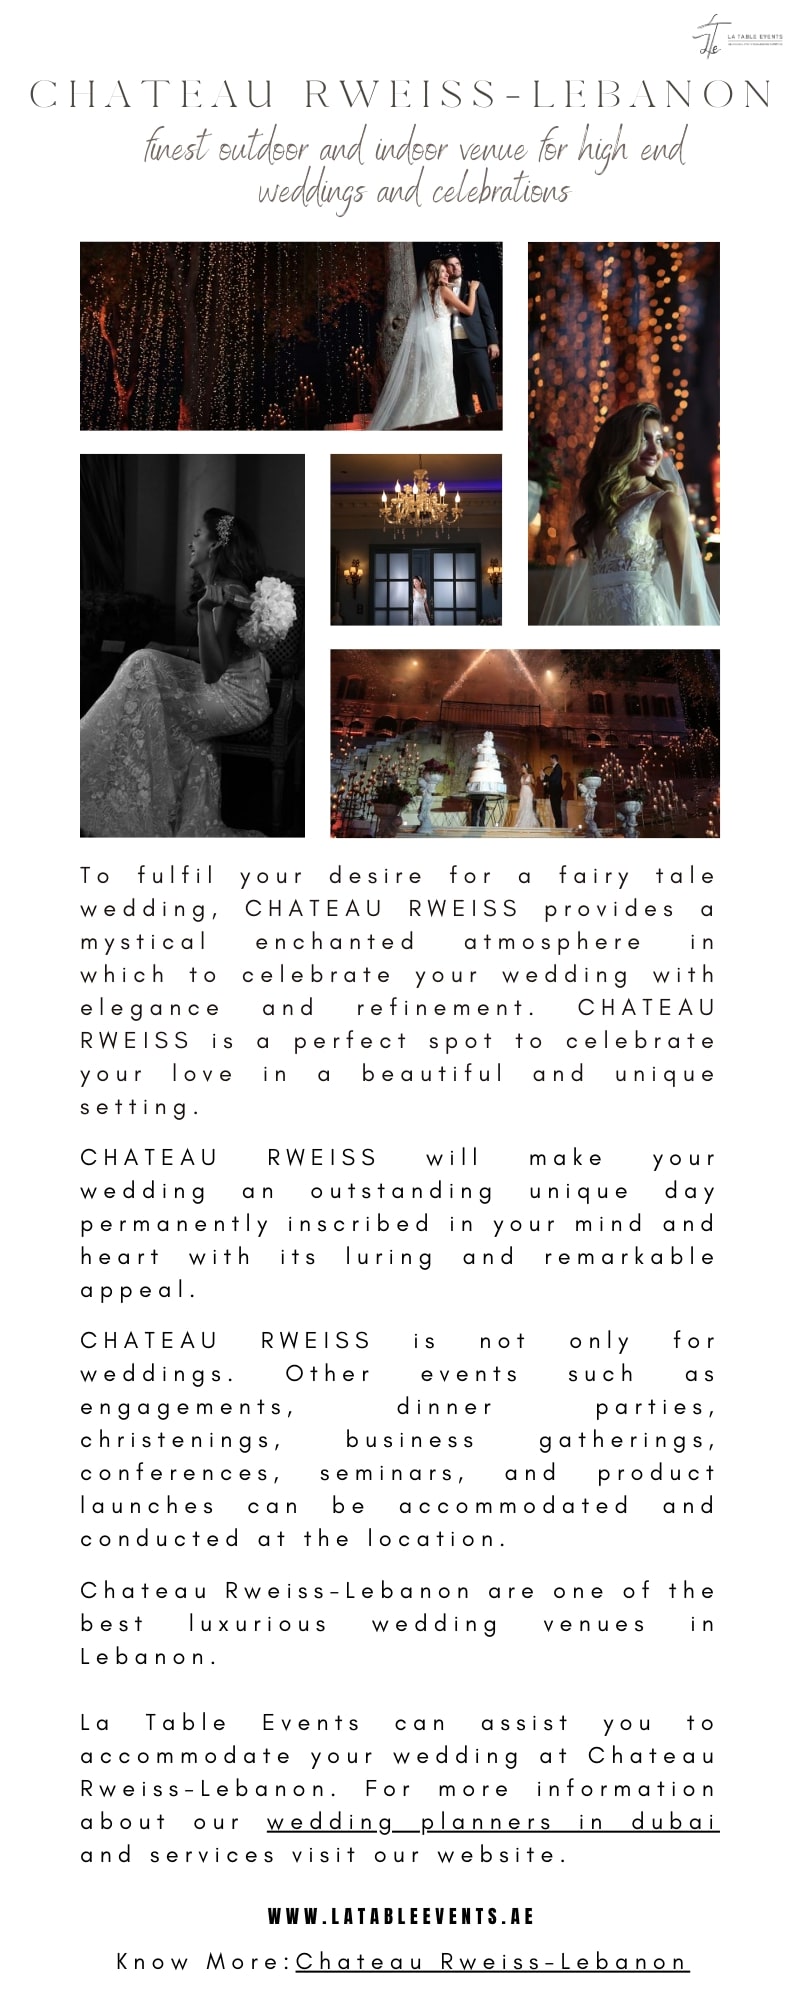 CHATEAU RWEISS-T 1B ANON

 

em

  

 

To fulfil your desire for ao fairy tale
wedding, CHATEAU RWEISS provides a
mystica enchanted atmosphere in
which to celebrate your wedding with
elegance and refinement CHATEAU
RWEISS is ao perfect spot to celebrate
your love in o beautiful and unique
setting

CHATEAU RWEISS will make your

wedding an outstanding unique day
permanently inscribed in your mind and
heart with its luring ond remarkable
appeal

CHATEAU RWEISS is not only for

weddings Other events such as
engagements, dinner parties,
christenings, business gatherings,
conferences, seminars, and product

launches can be accommodated and
conducted at the location

Chateou Rweiss-lLebanon are one of the
best luxurious wedding venues in
Lebanon

Lo Table Events can assist you to
accommodate your wedding at Chateau
Rweiss-lLebanon For more information
about our wedding planners in duba:

and services visit our website

WWW. LATABLEEVENTS. AE

Know More: Chotecu Rweiss-lebonon